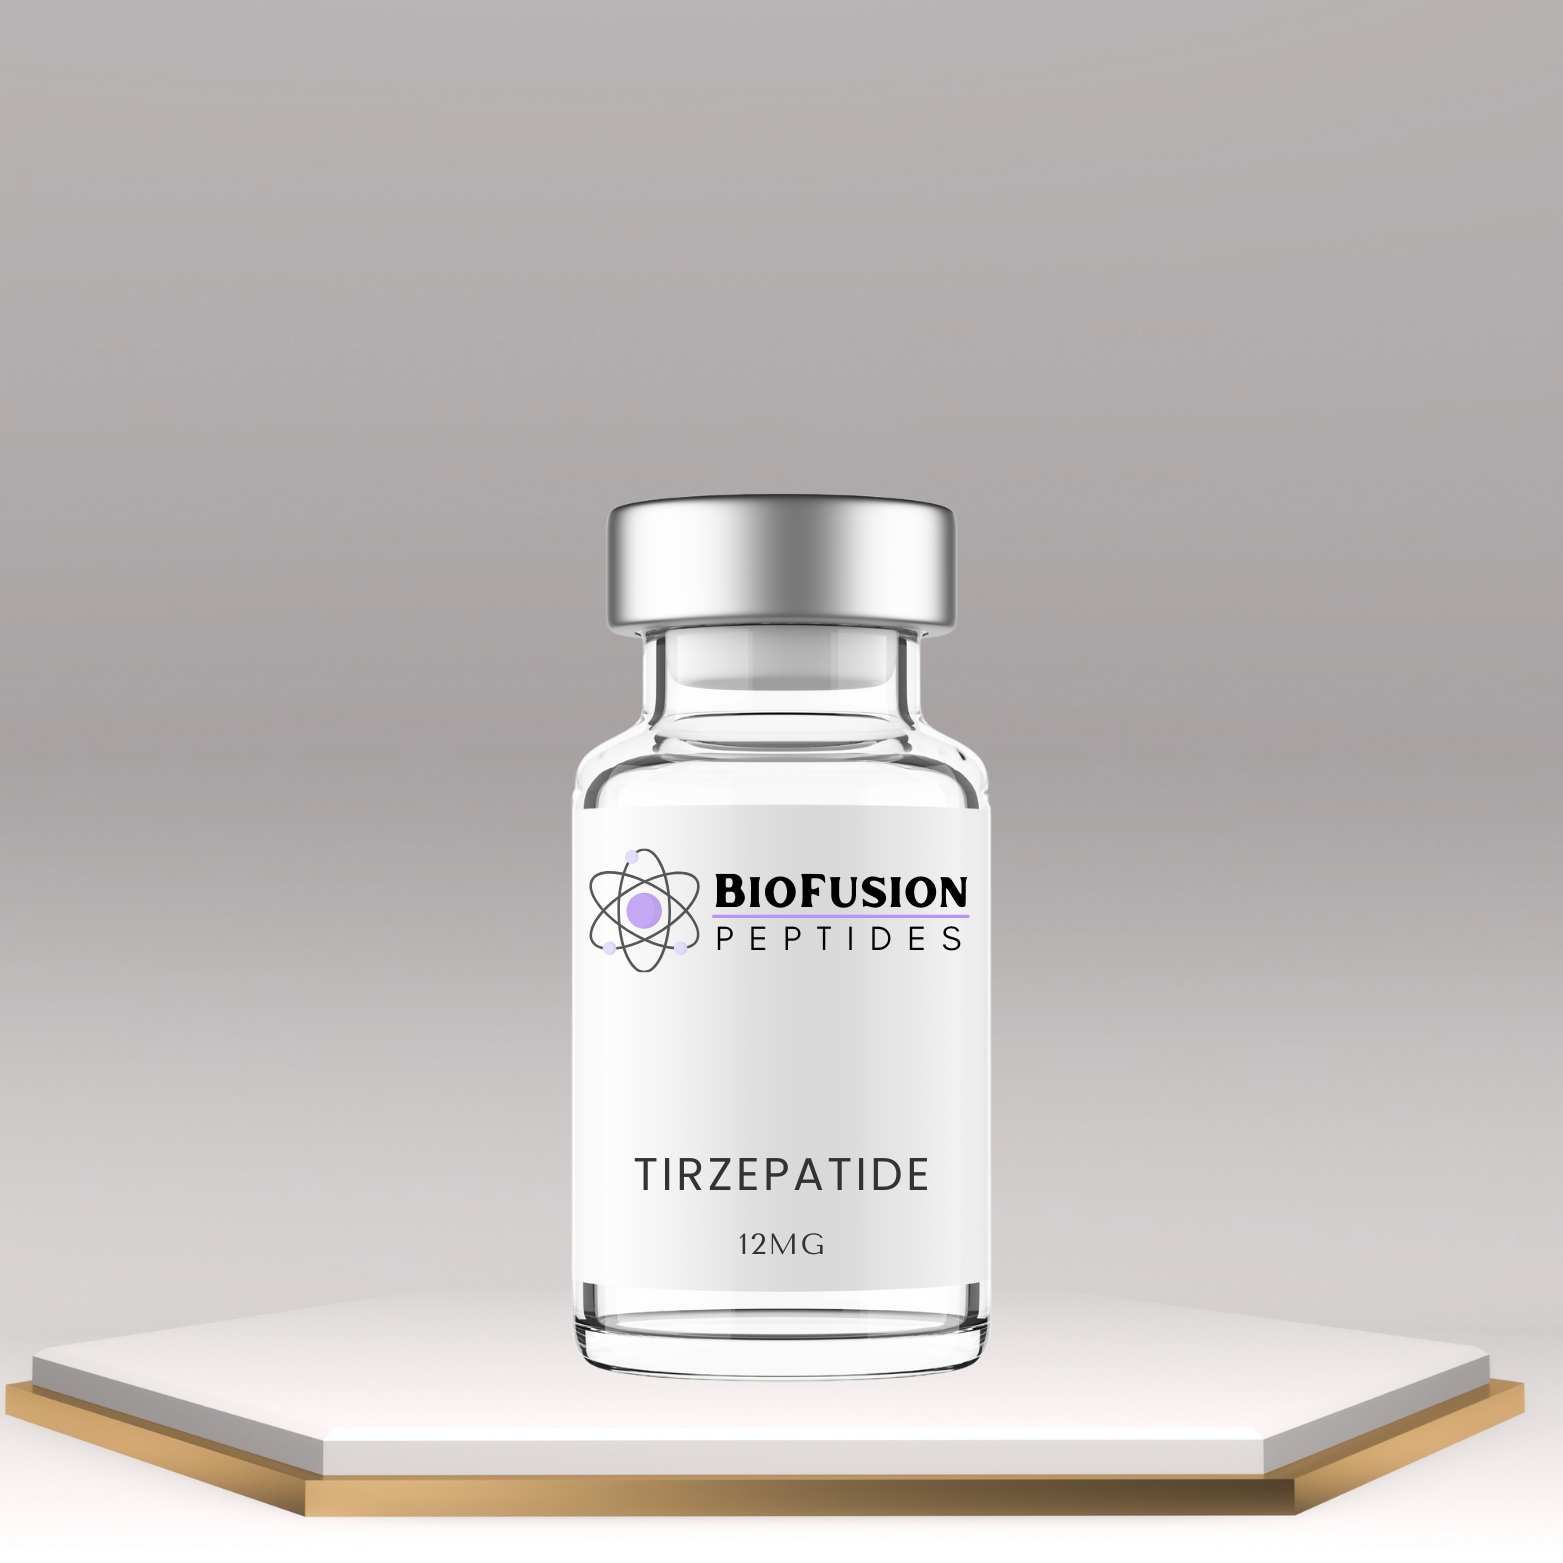 BioFusion Peptides Tirzepatide (12MG) vial